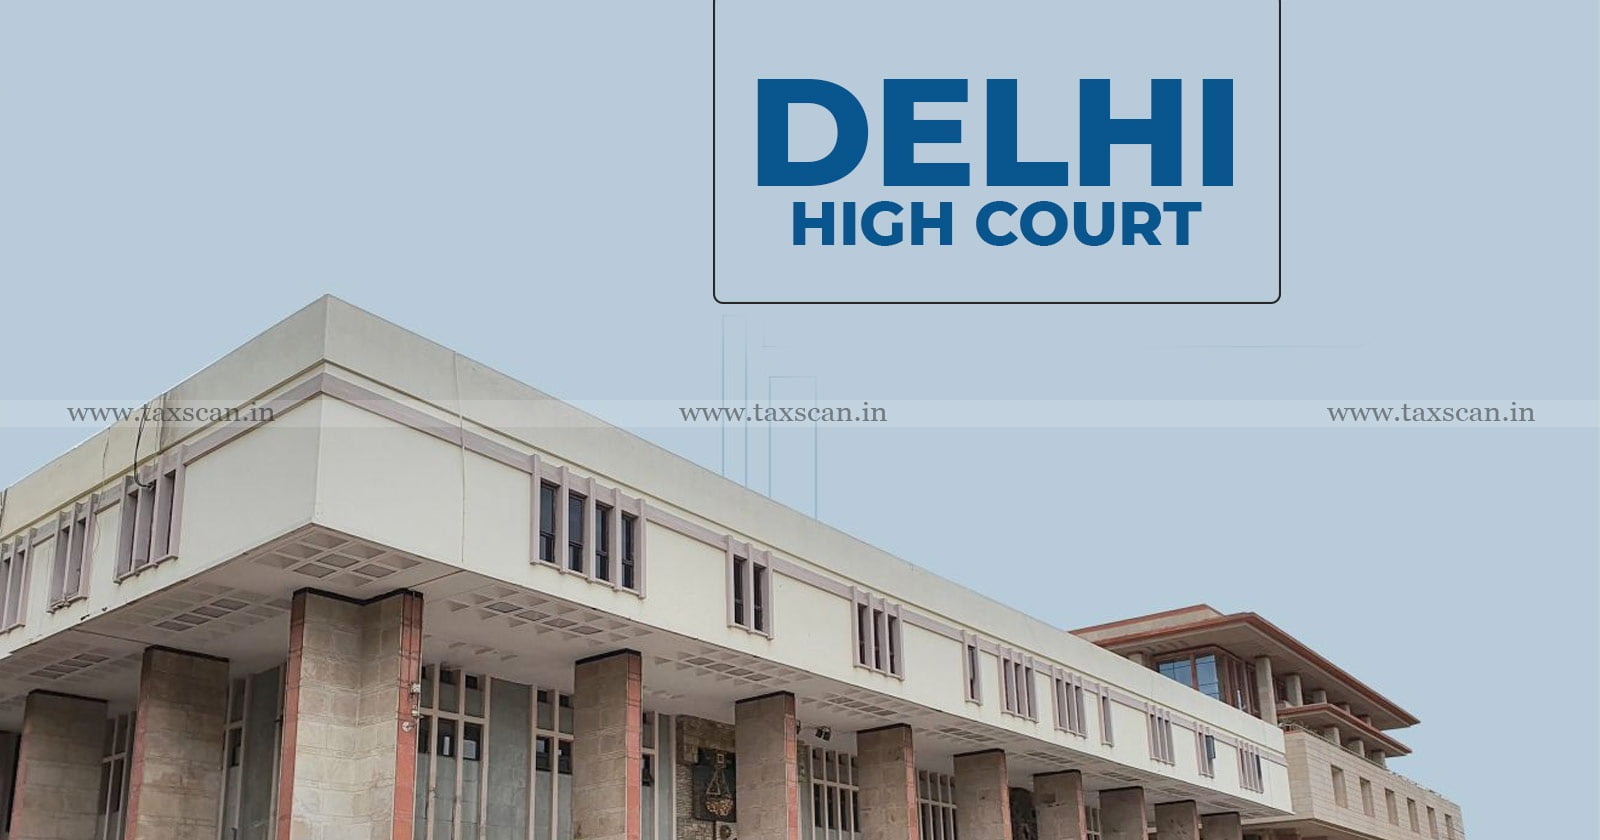 Delhi High Court - CESTAT - Customs Excise and Service Tax Appellate Tribunal - TAXSCAN